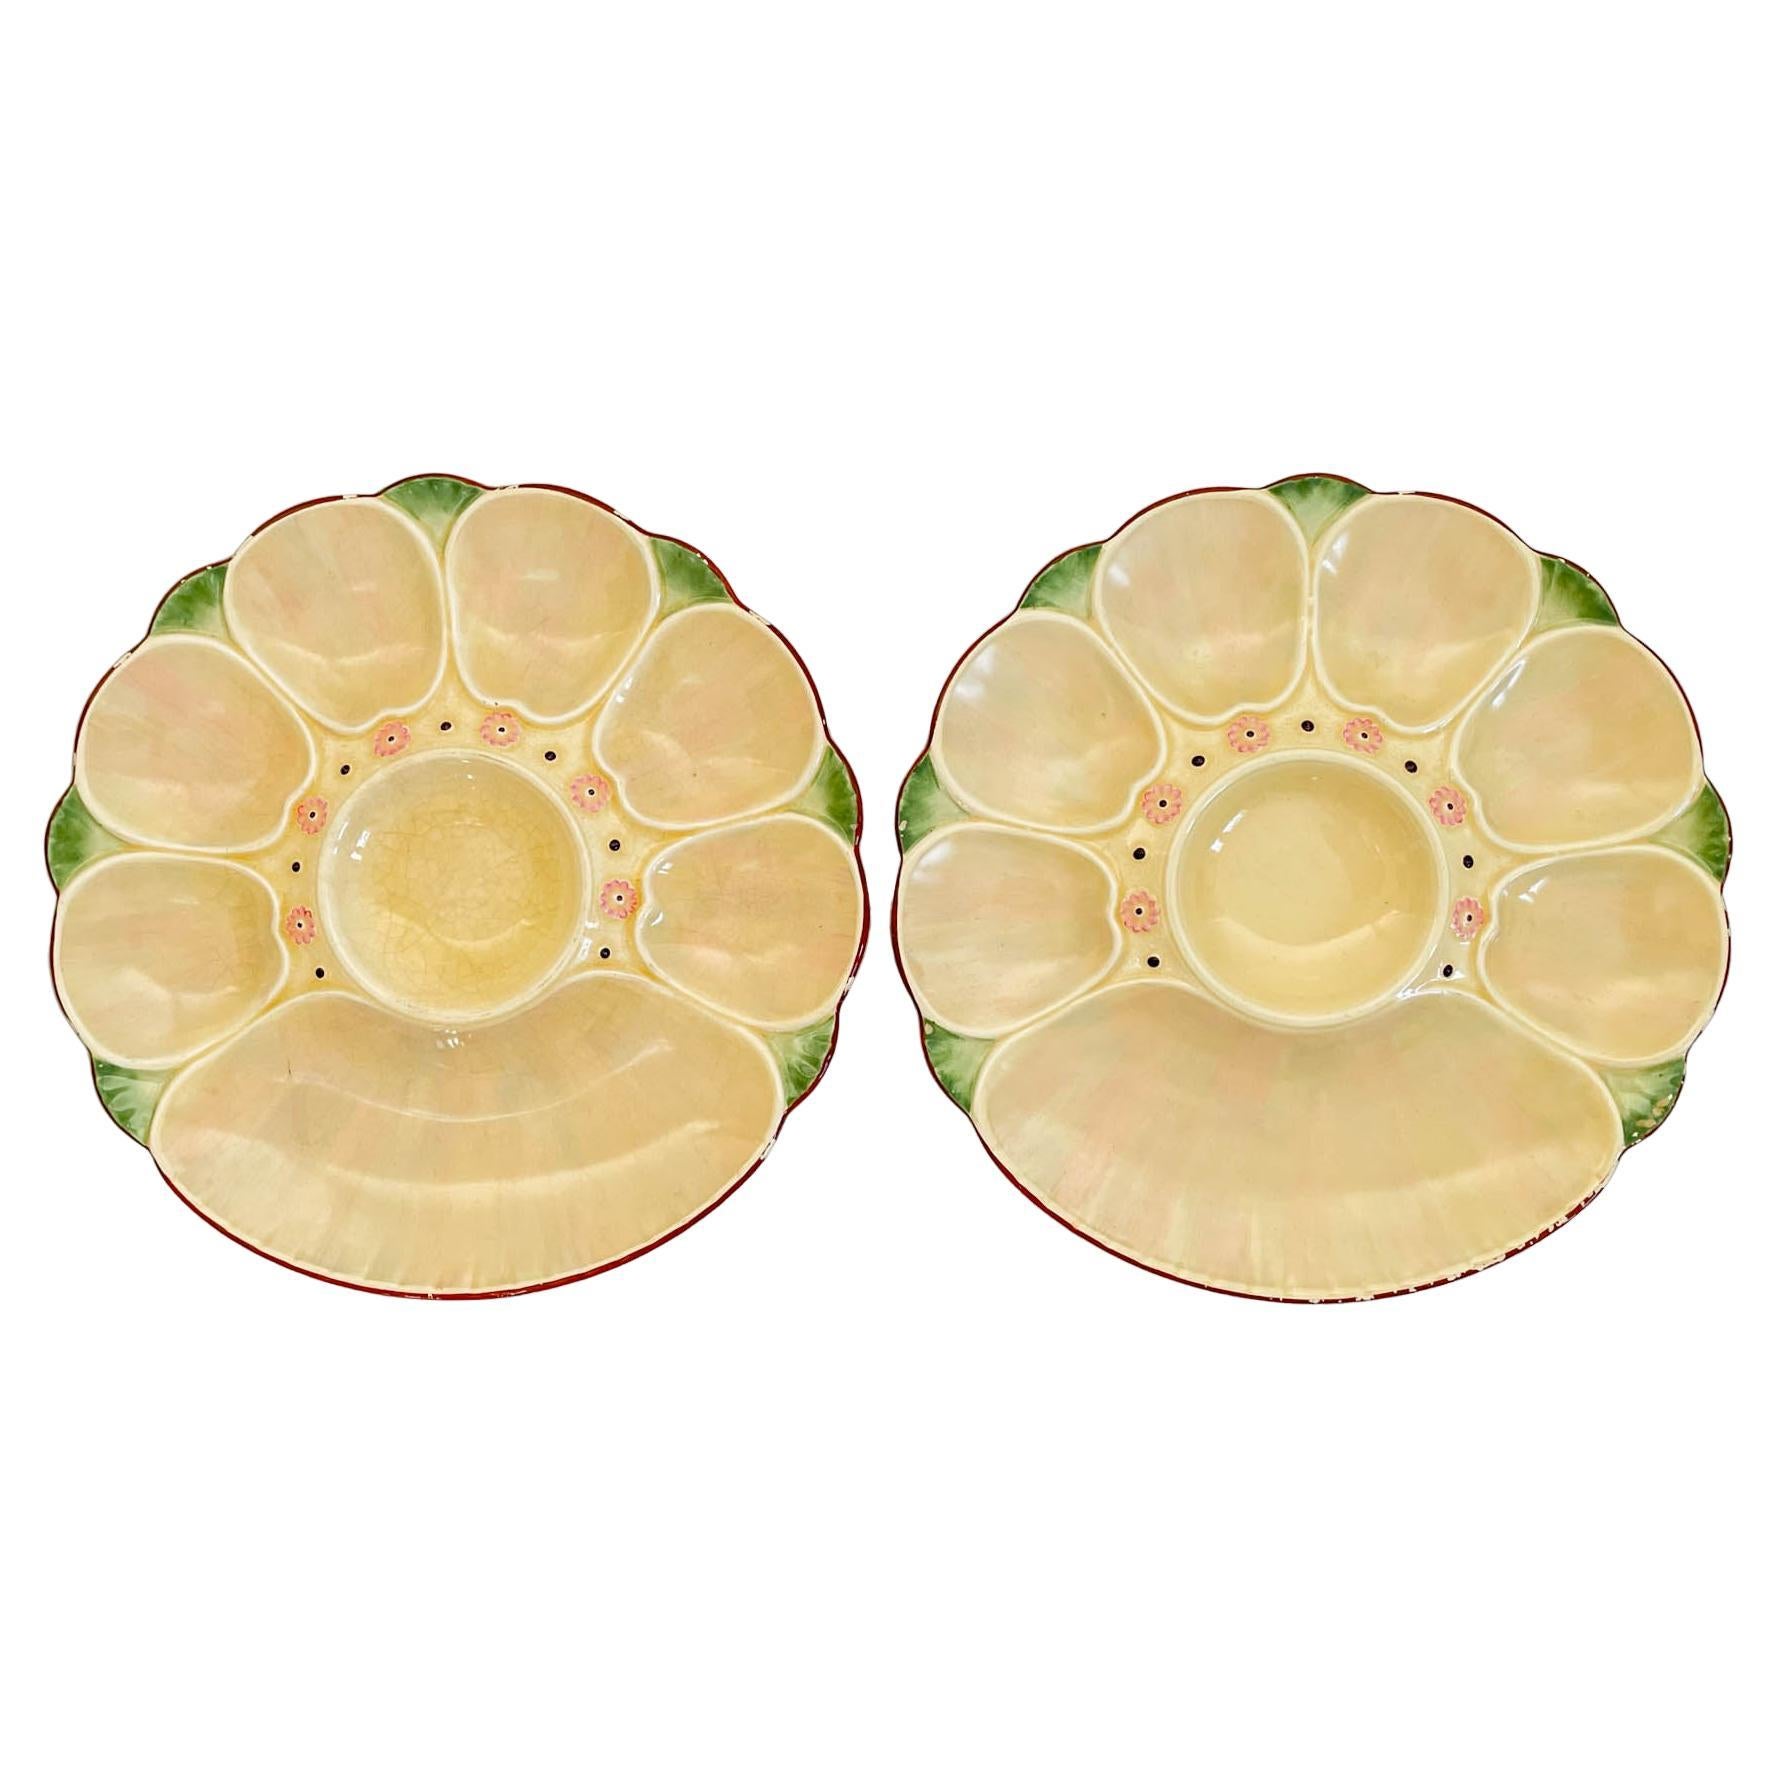 19th Century English Minton Majolica Oyster Plates Pair For Sale